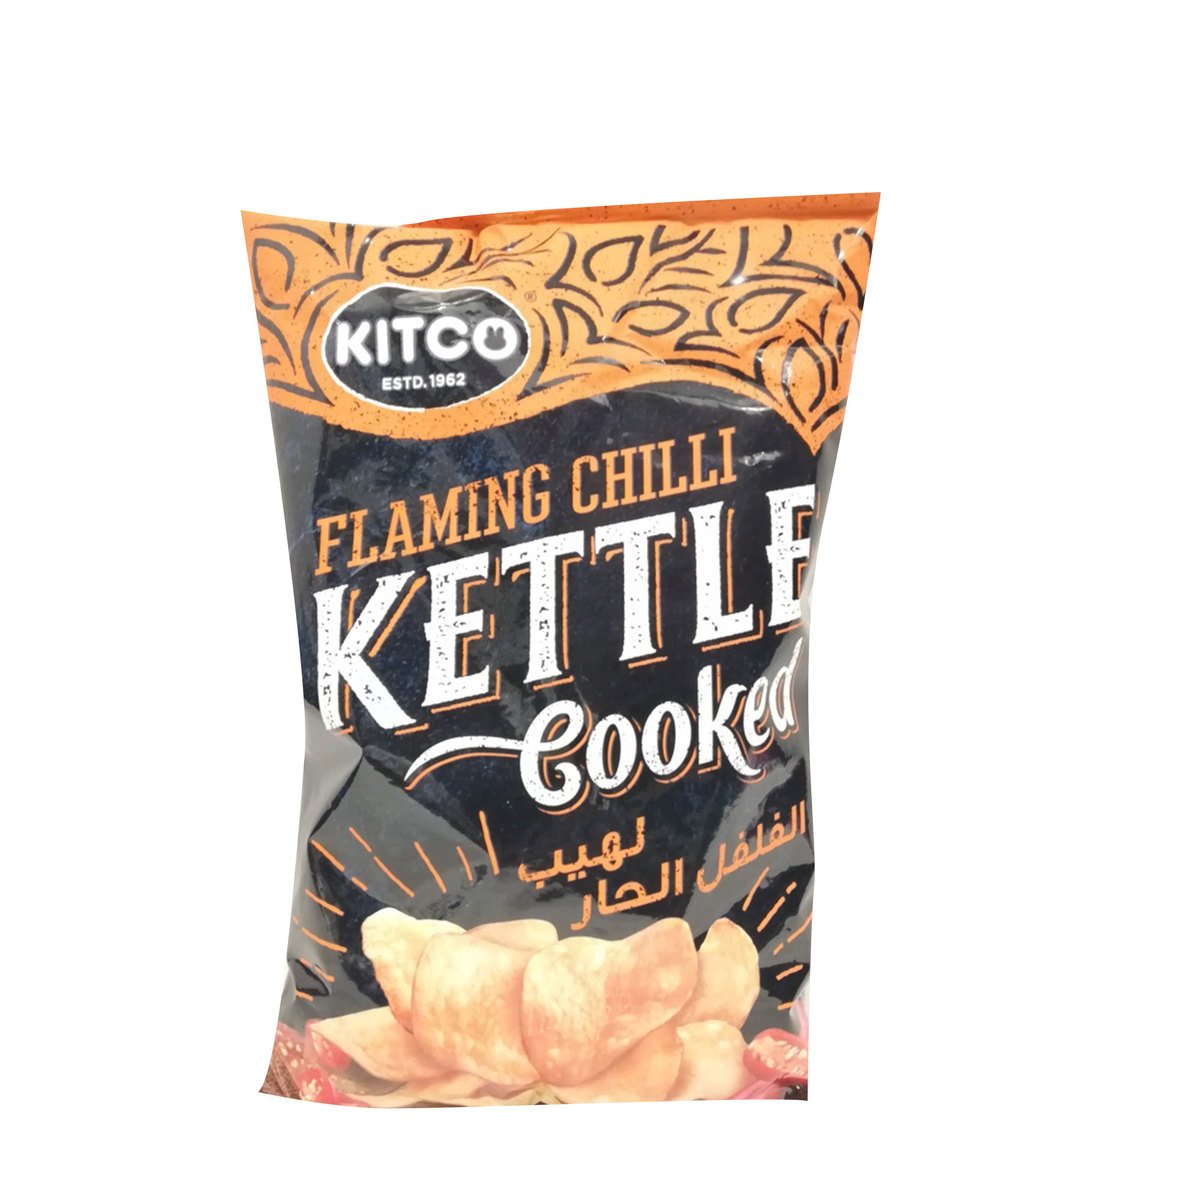 Kitco Kettle Cooked Potato Chips Flaming Chilli 170g